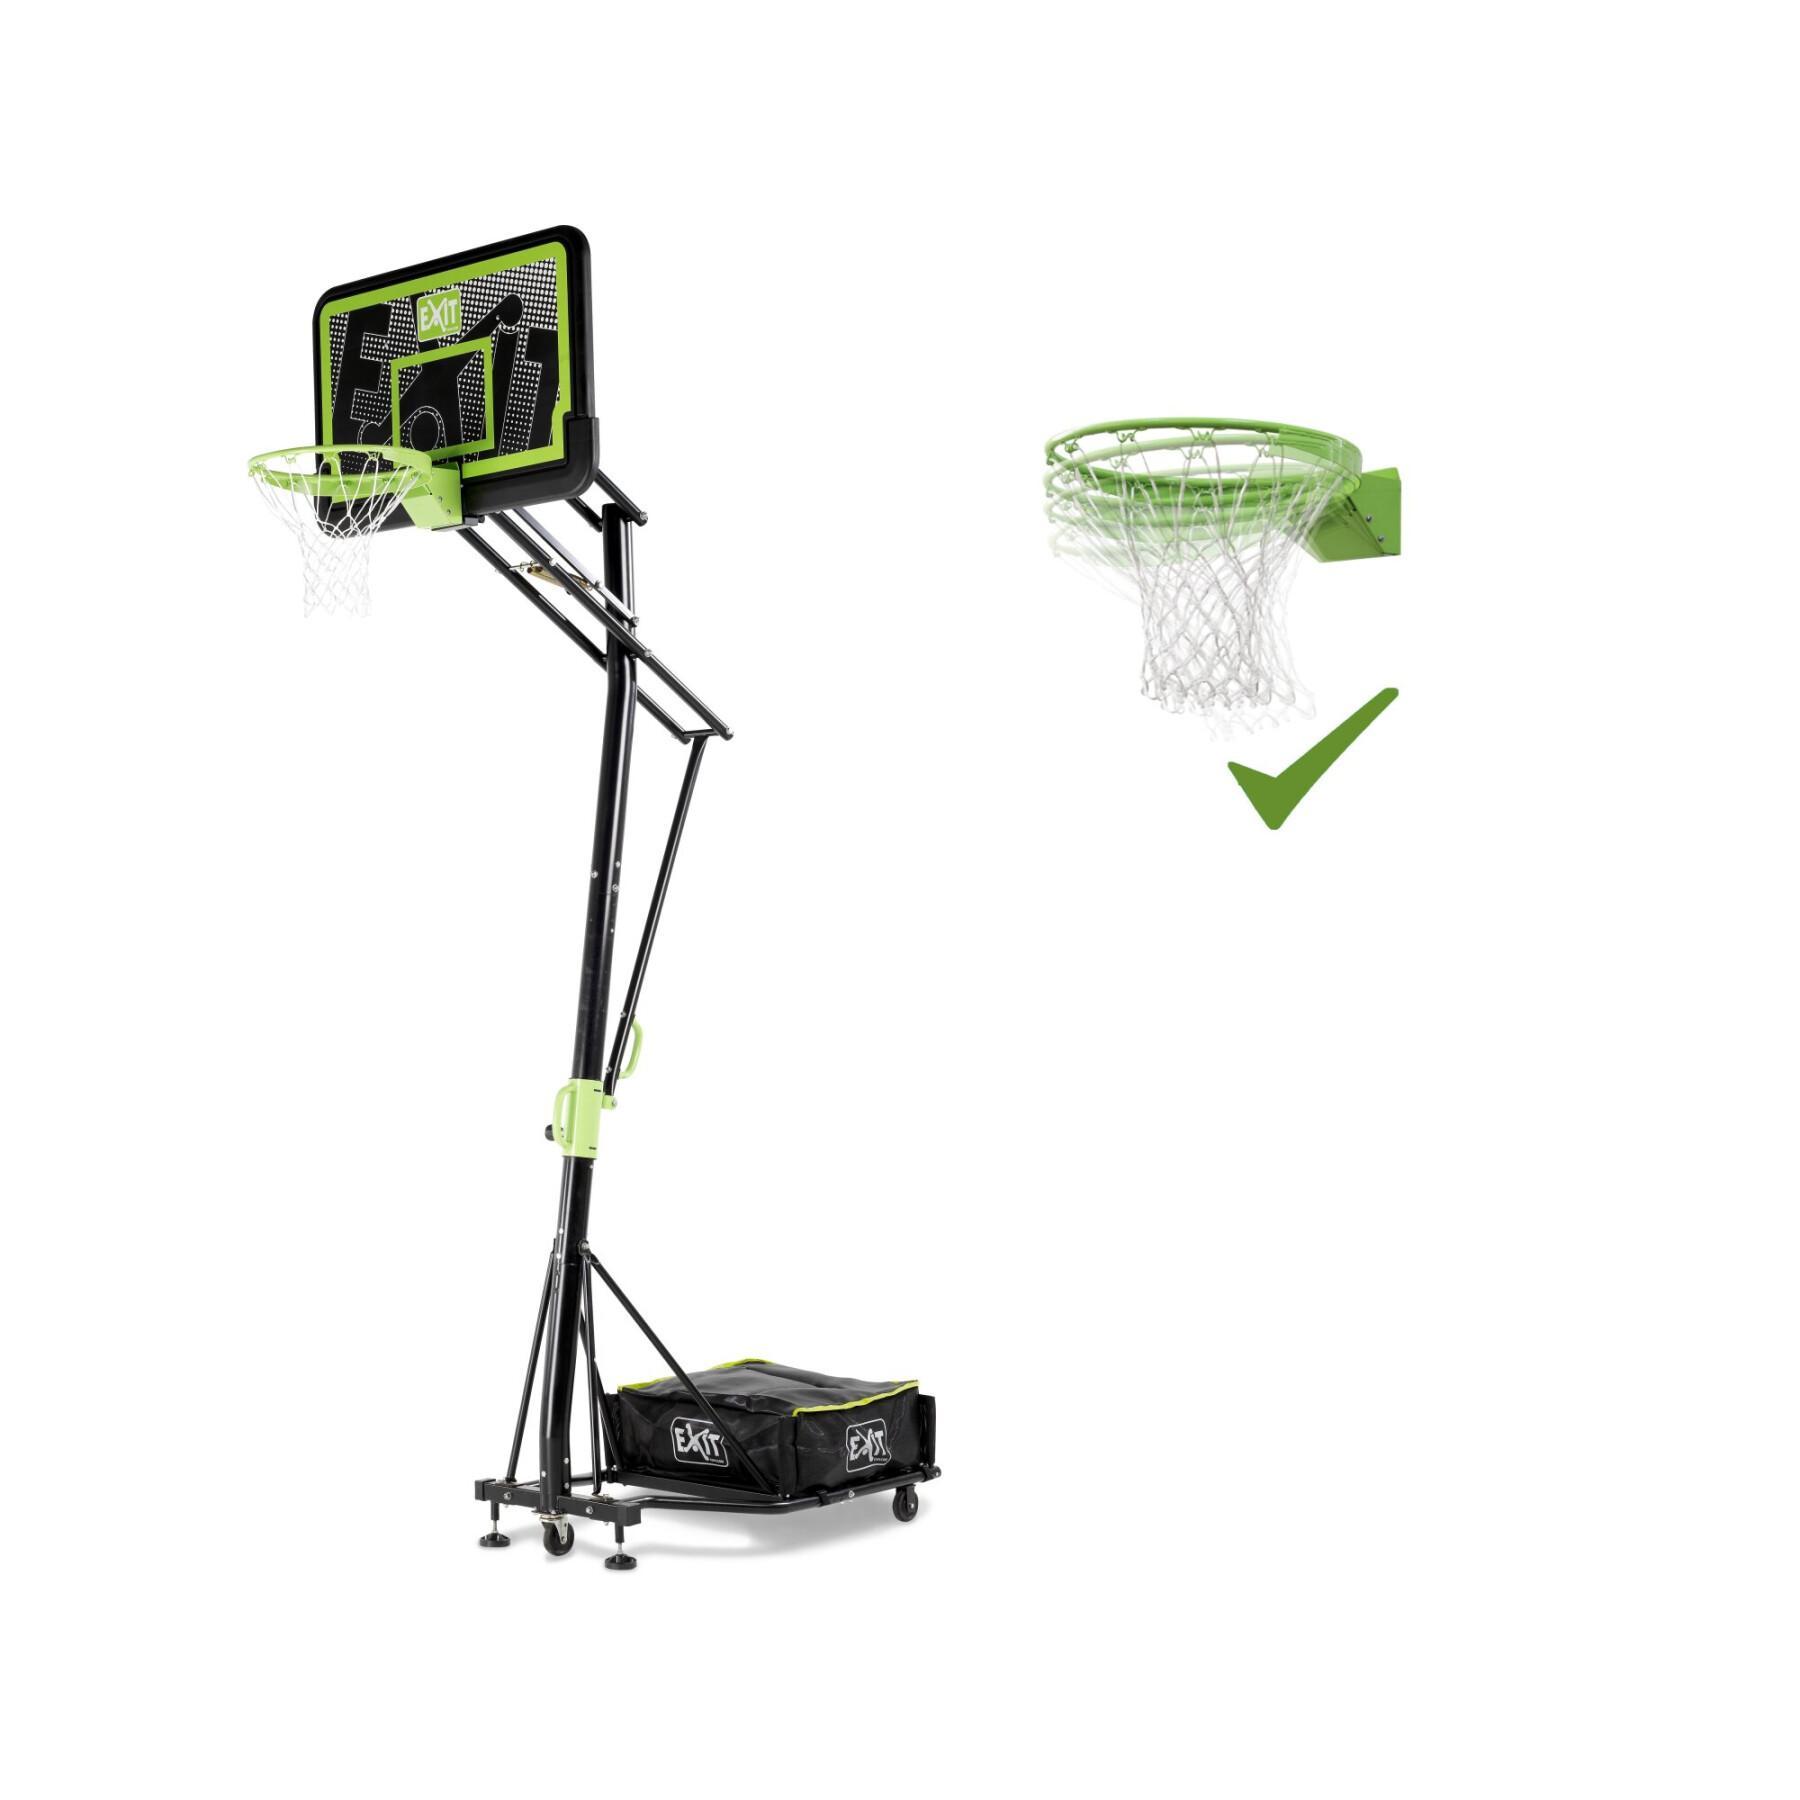 Mobile basketball basket with wheels and dunk circle Exit Toys Galaxy